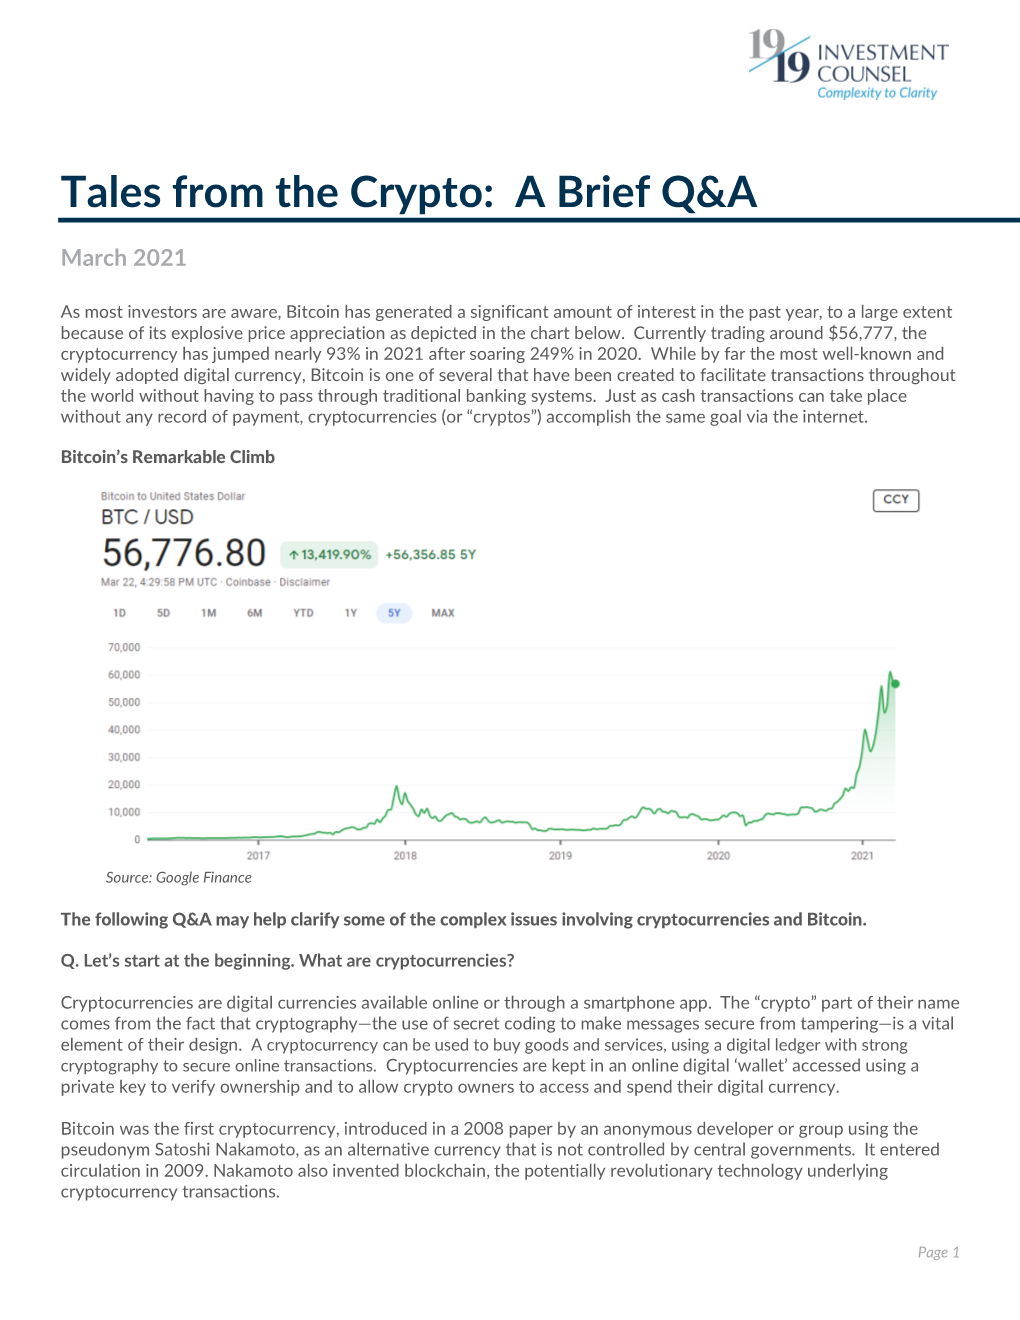 Tales from the Crypto: a Brief Q&A